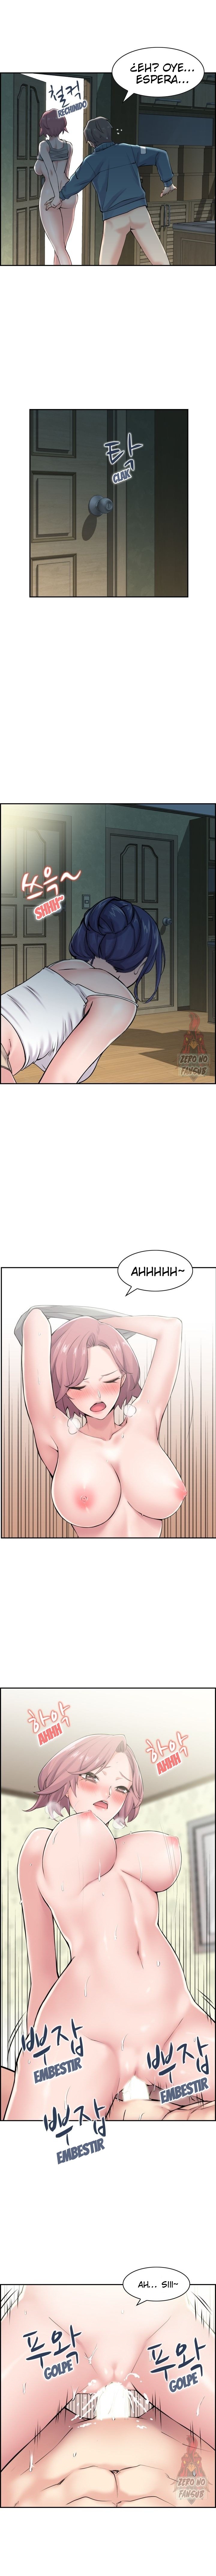 Sister in Law Manhwa Raw - Chapter 14 Page 5